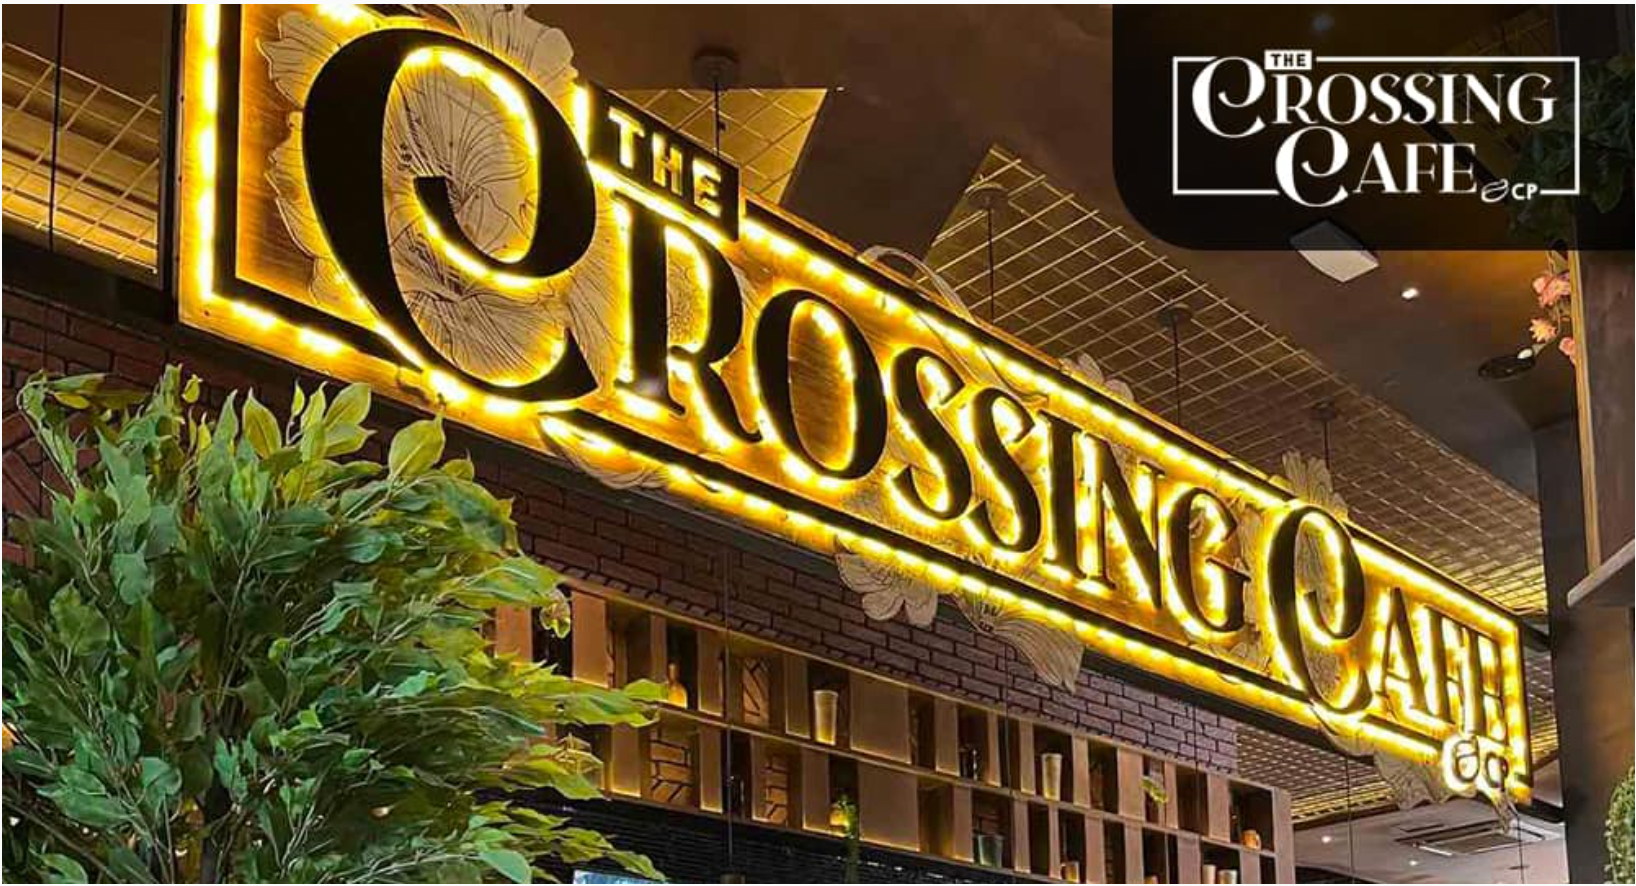 The Crossing Cafe